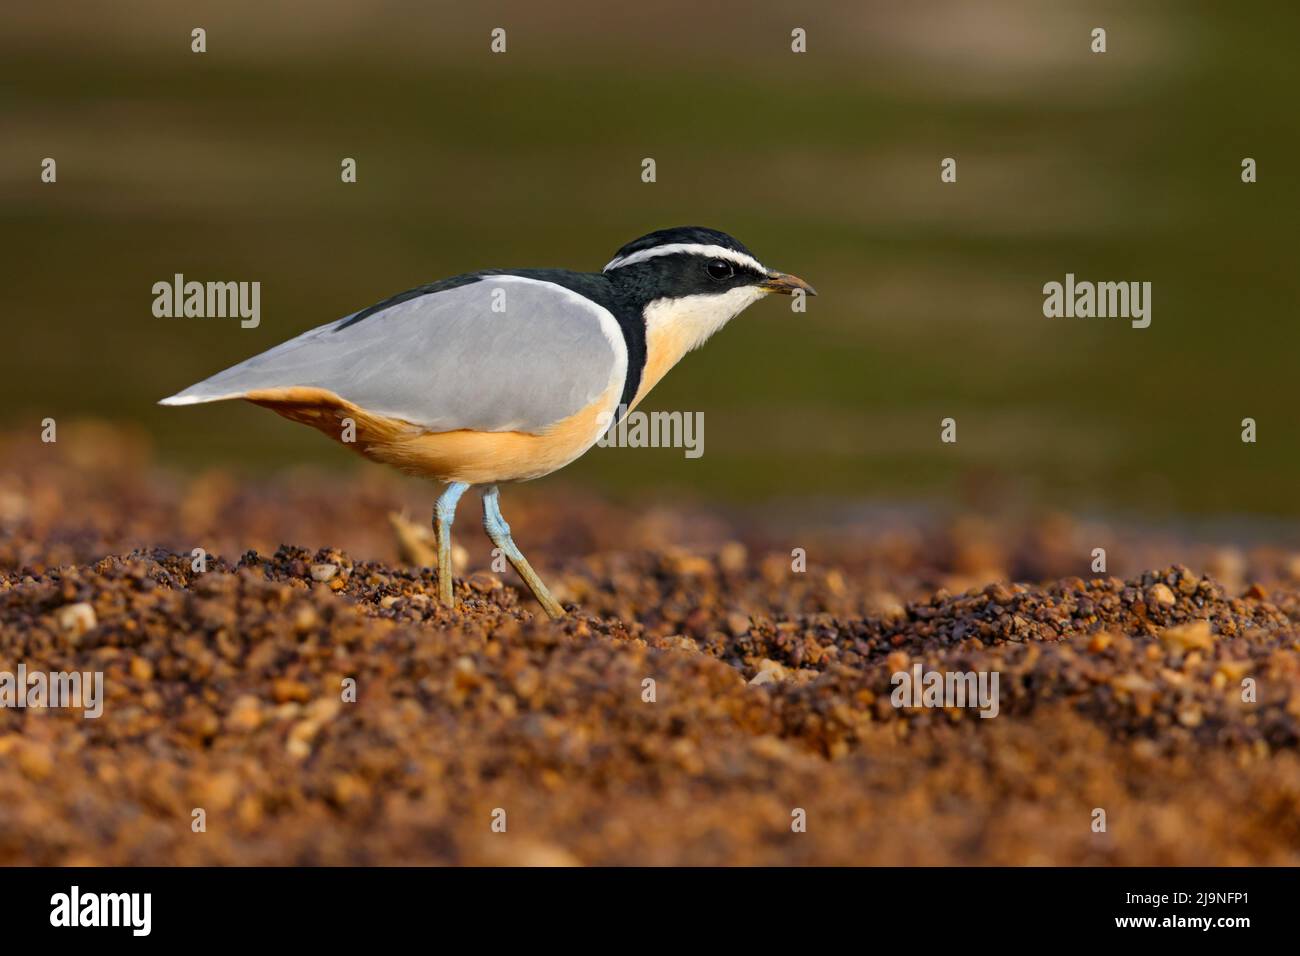 An adult Egyptian Plover (Pluvianus aegyptius) walking on the shore of the River Gambia in Senegal Stock Photo